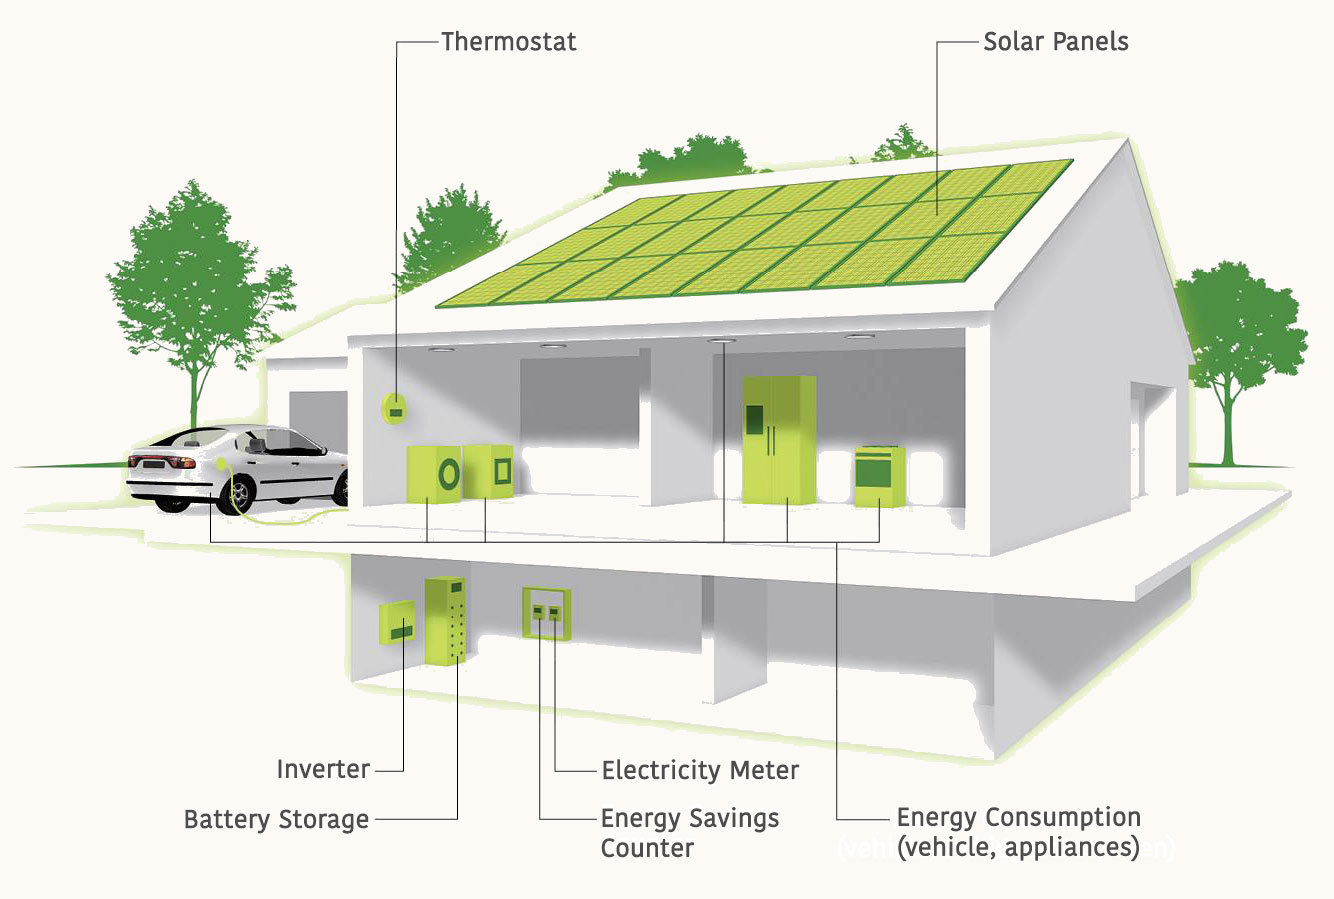 In Germany, Consumers Embrace a Shift to Home Batteries